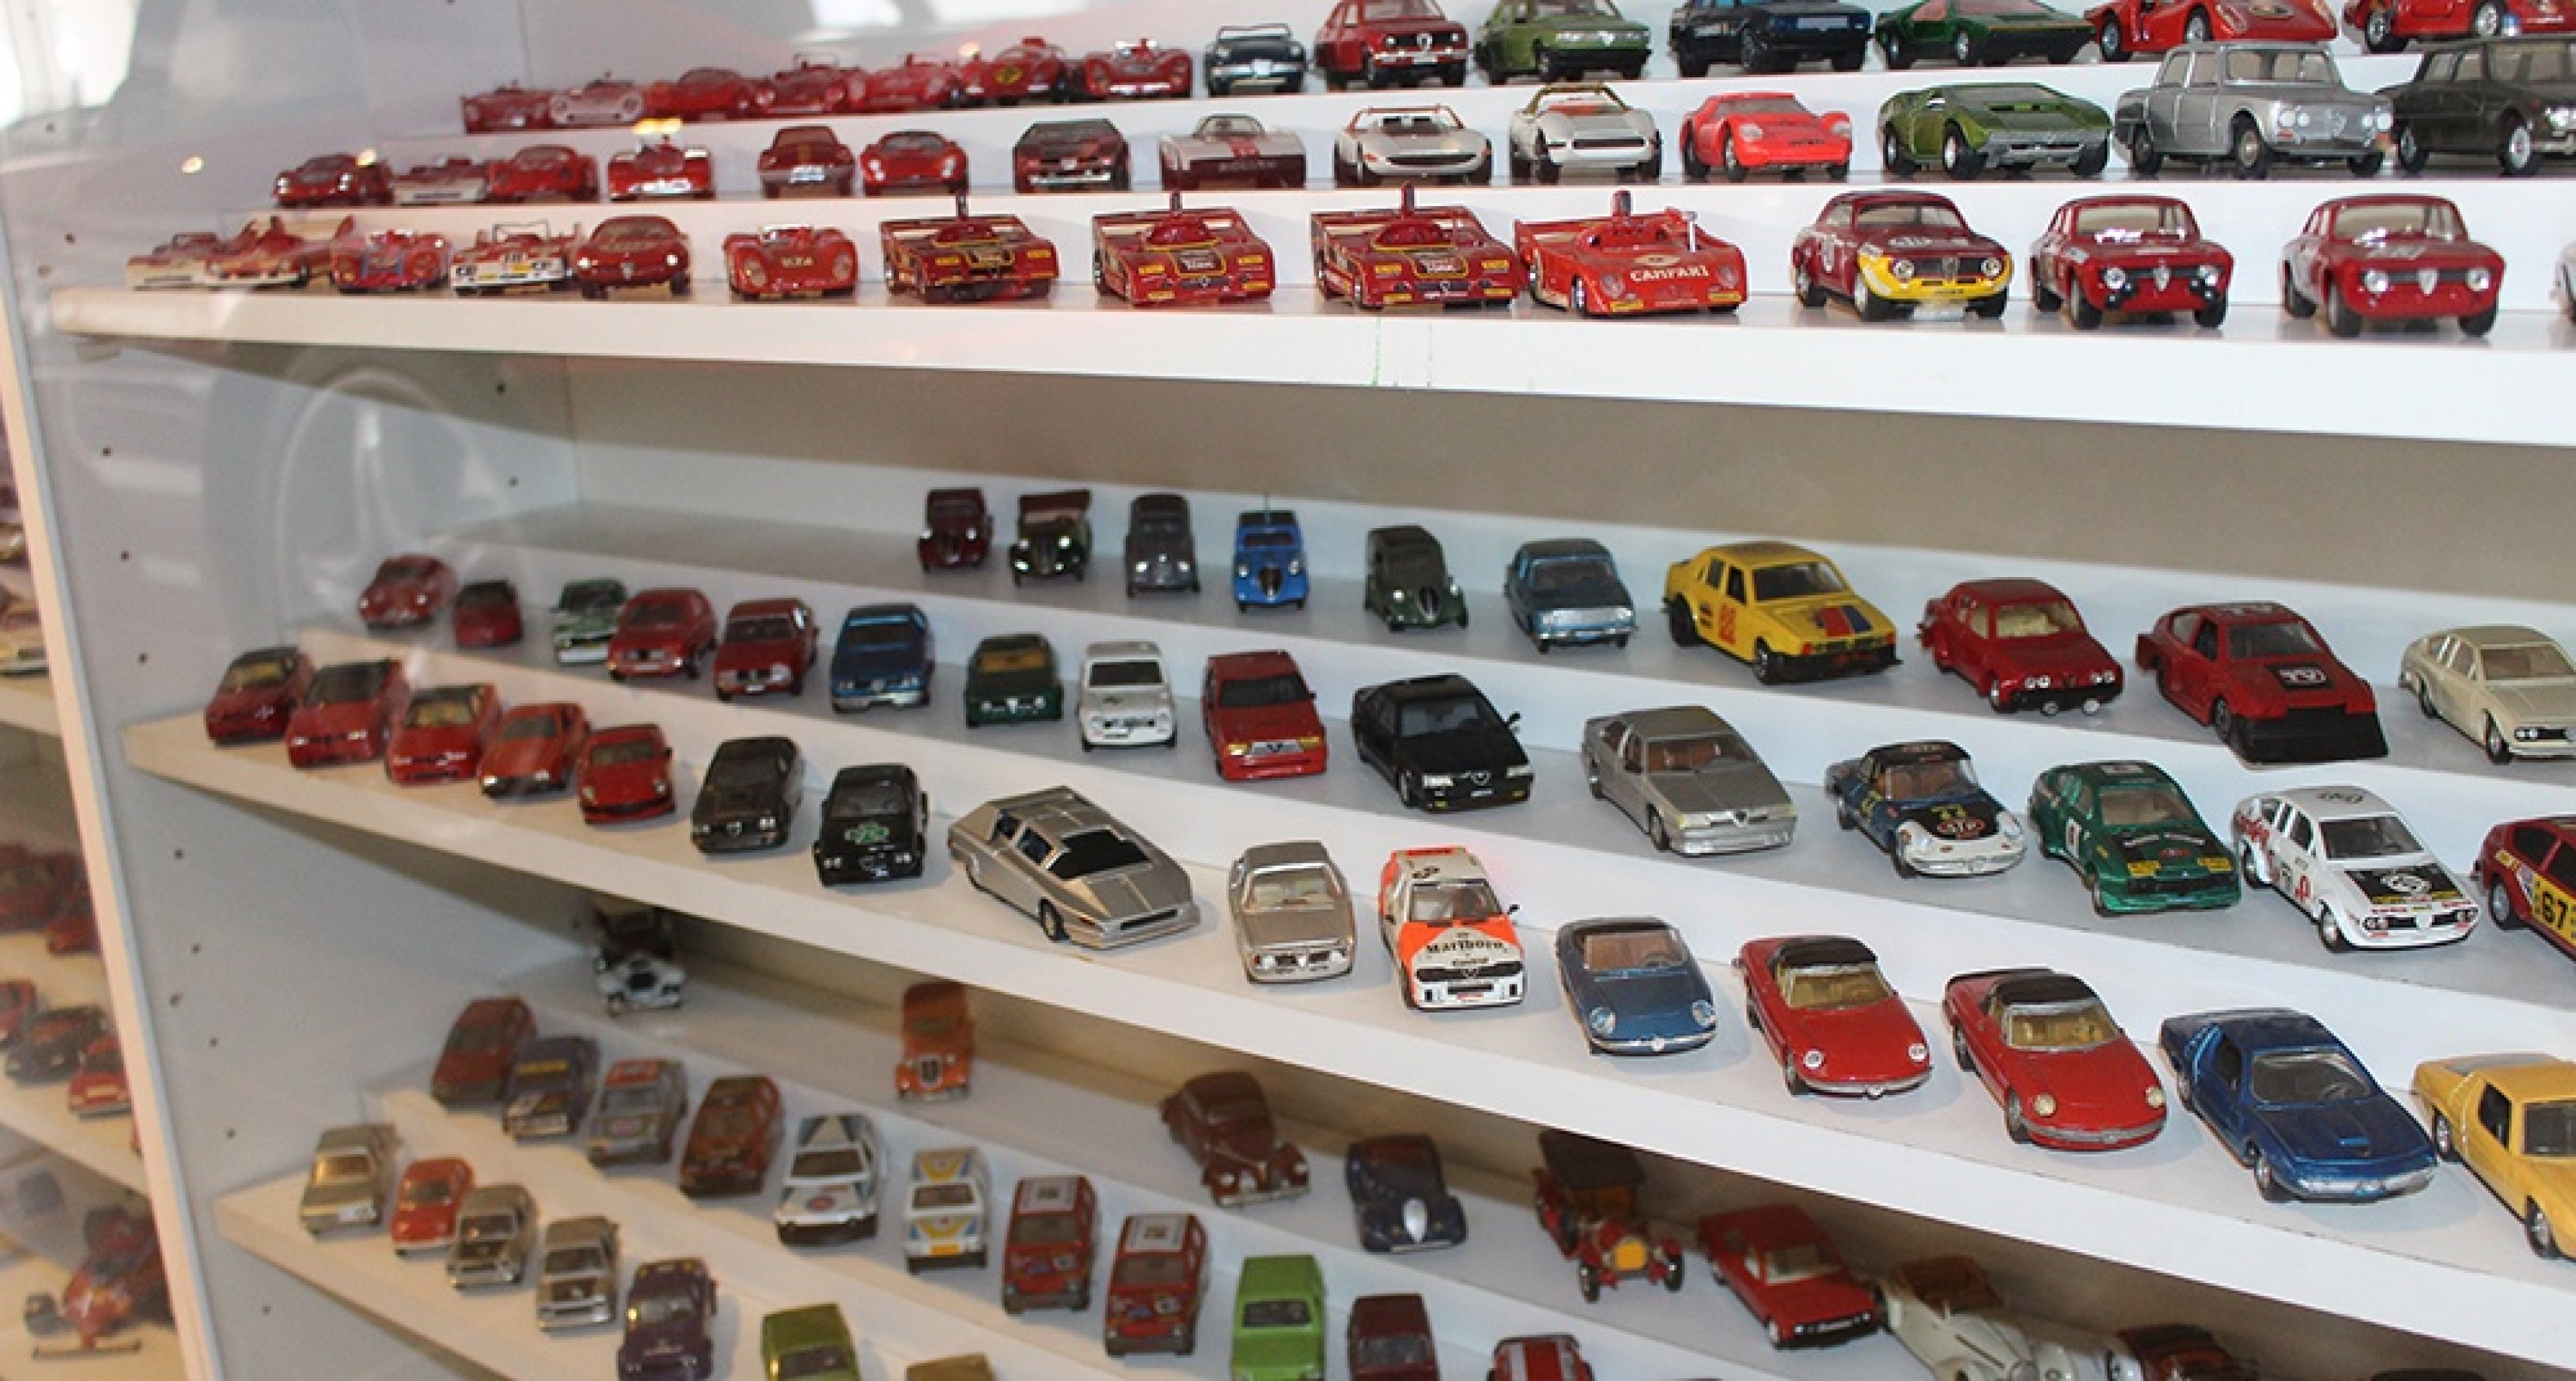 Peter Monteverdi’s incredible model car collection is up for sale